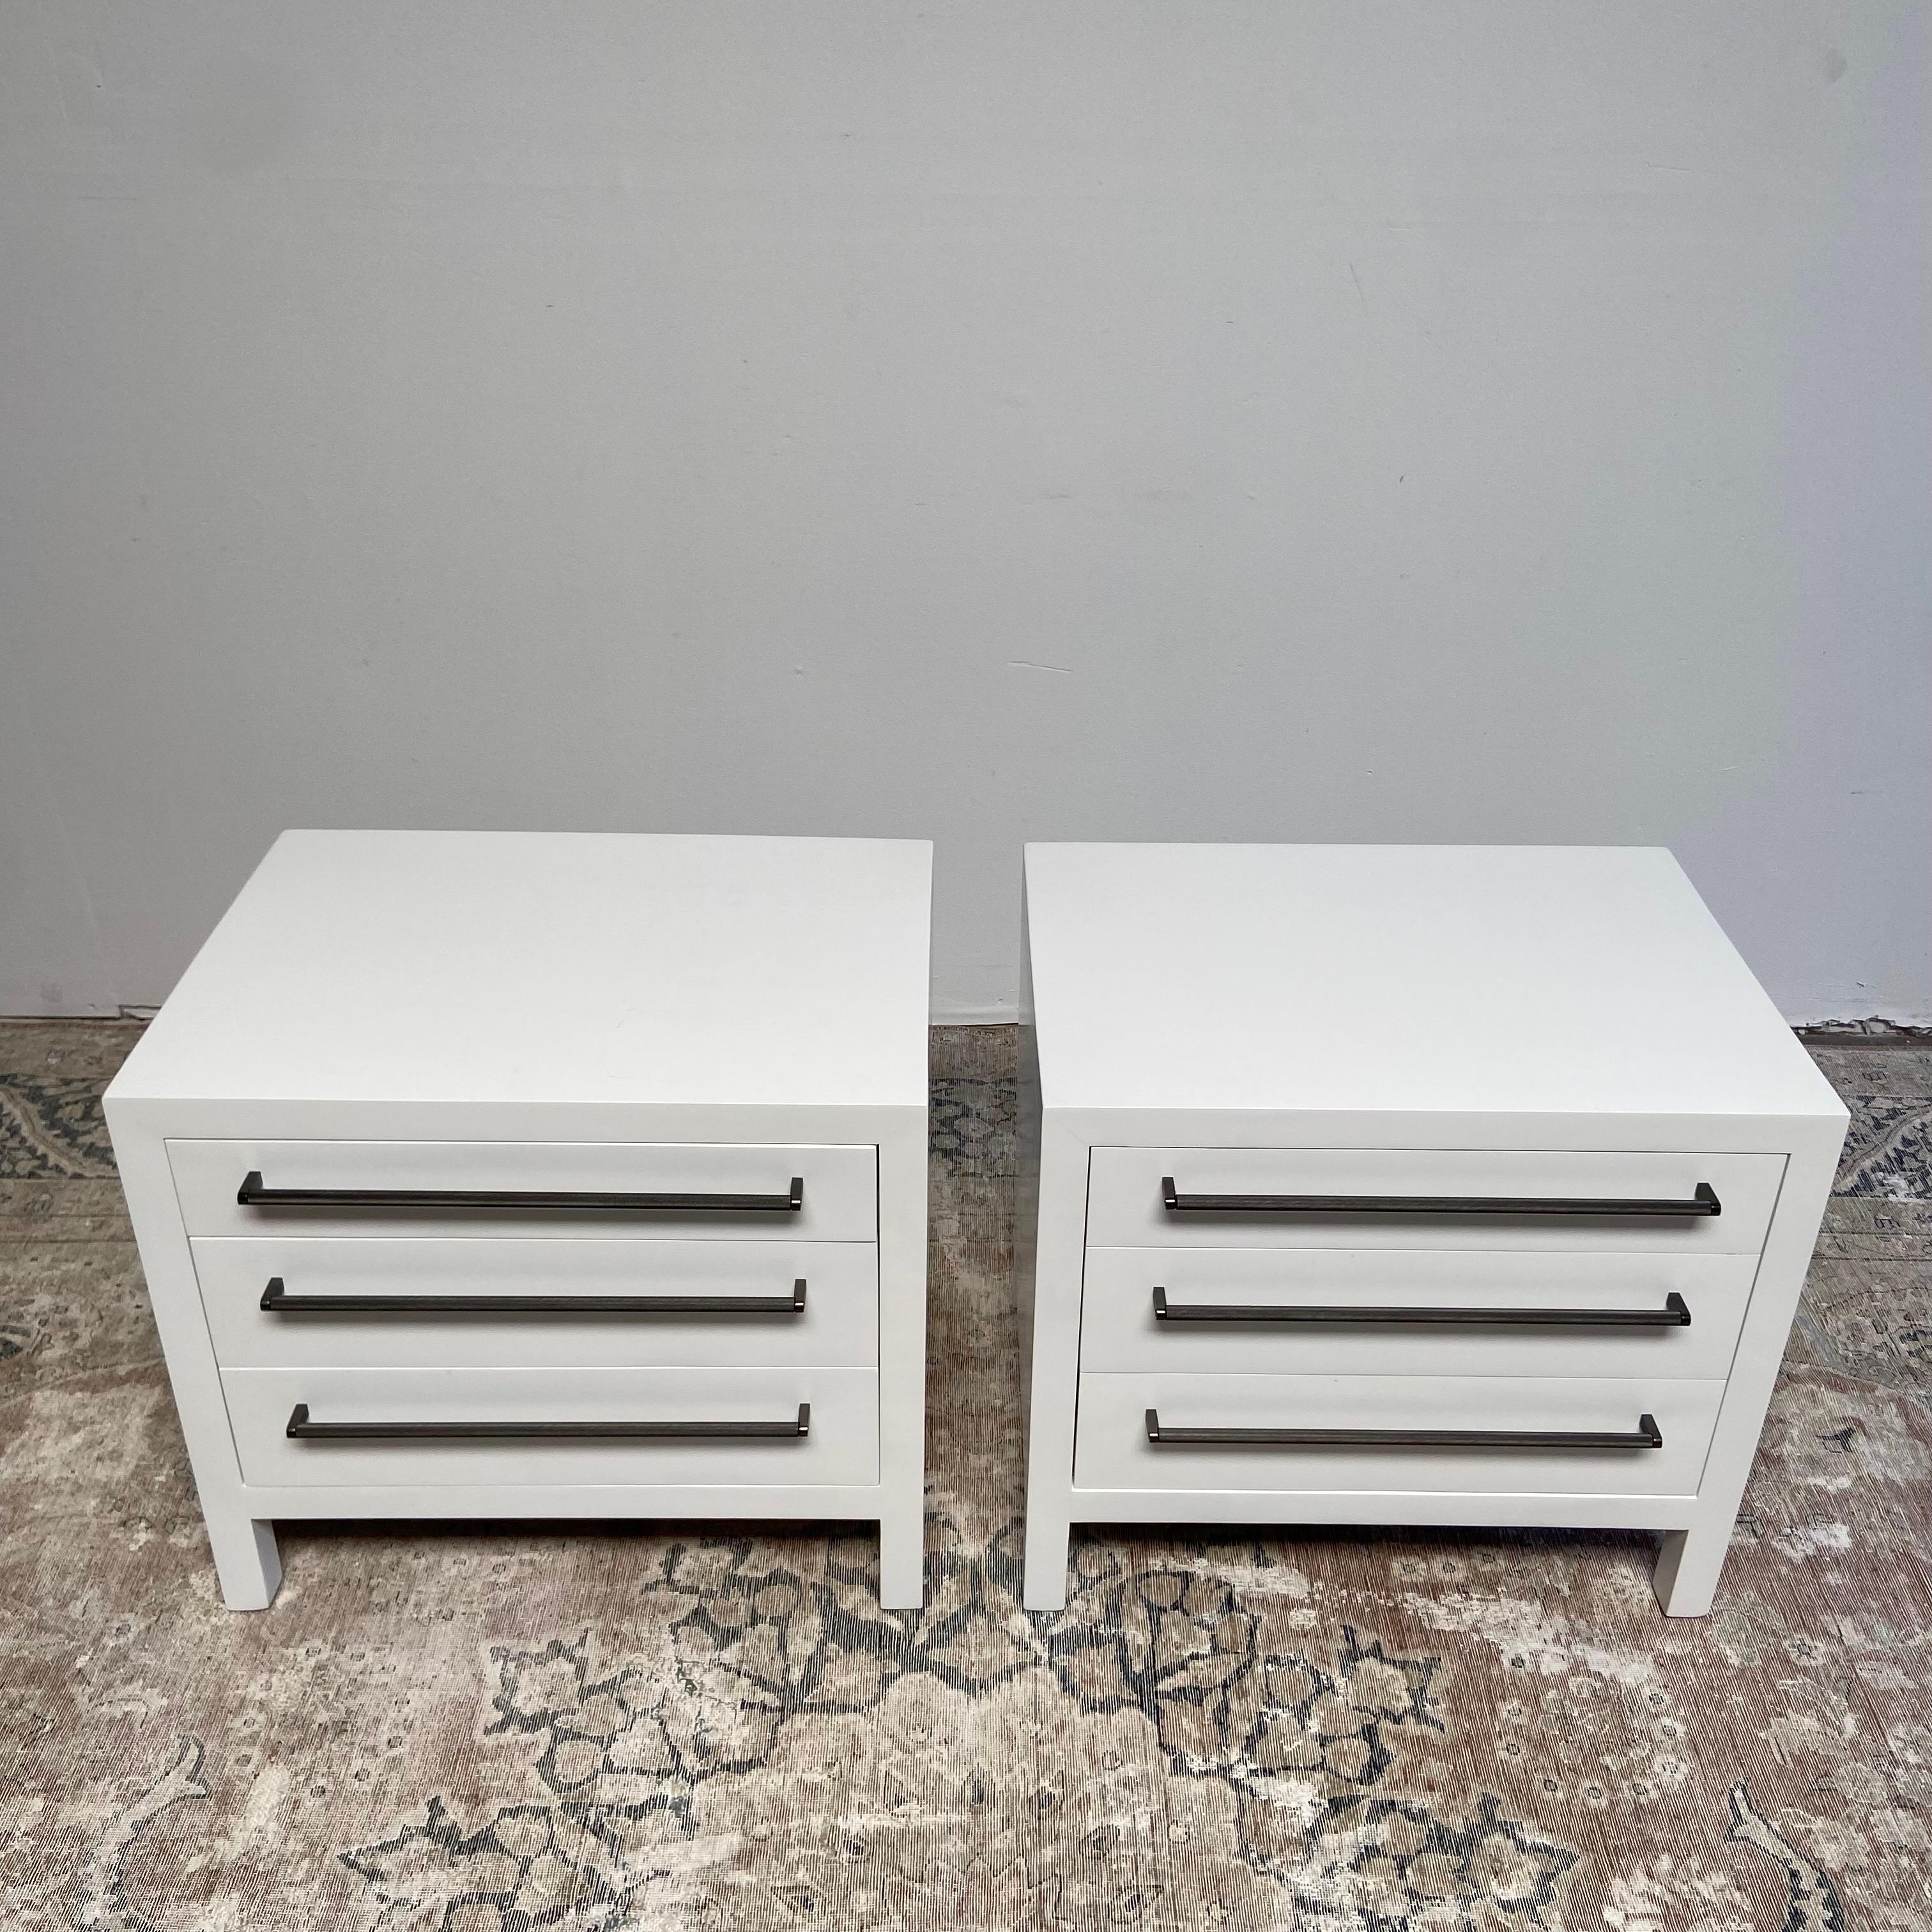 Size: 28”w x 20”d x 25-1/2”h
Pair of custom made white painted 3 drawer night stands with bronze knurled handles.  Dovetail drawers, solid wood with soft close.
This pair is for the floor samples.  Please inquire with us for custom sizes.
Custom